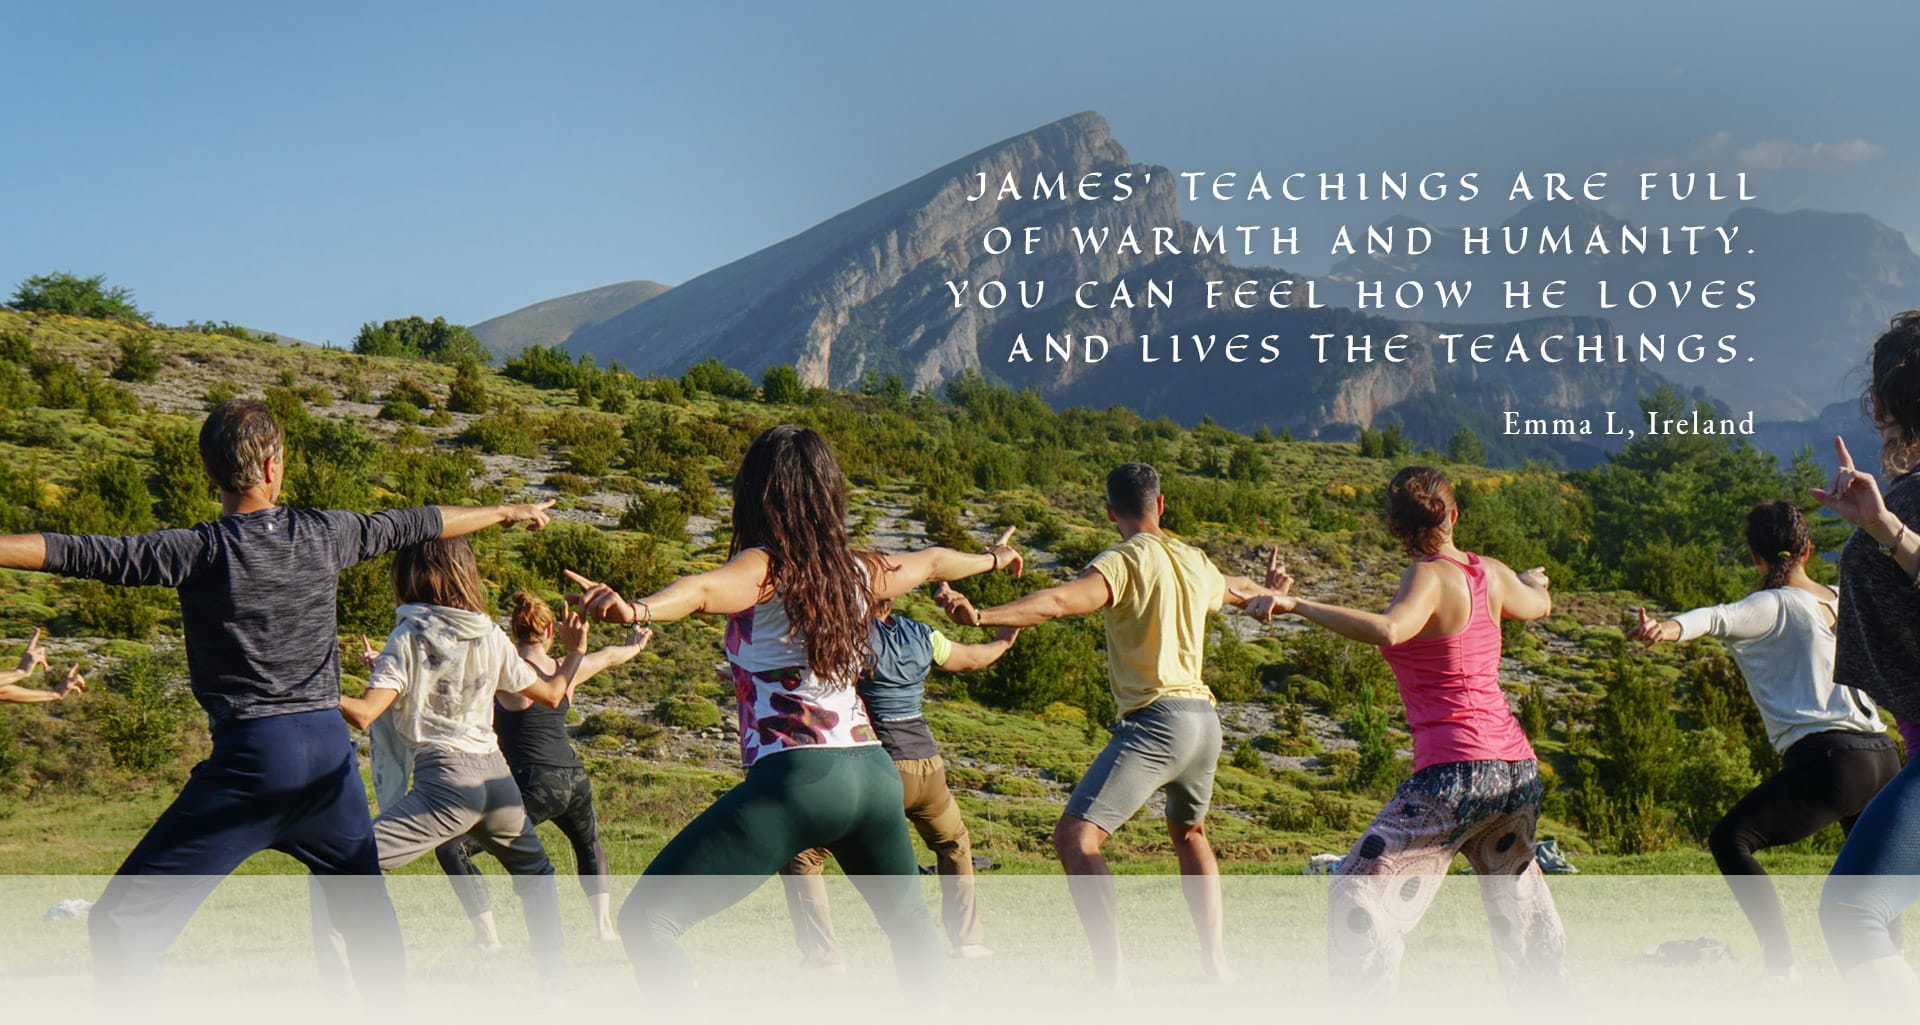 James teachings are full of warmth and humanity You can feel how he loves and lives the teachings